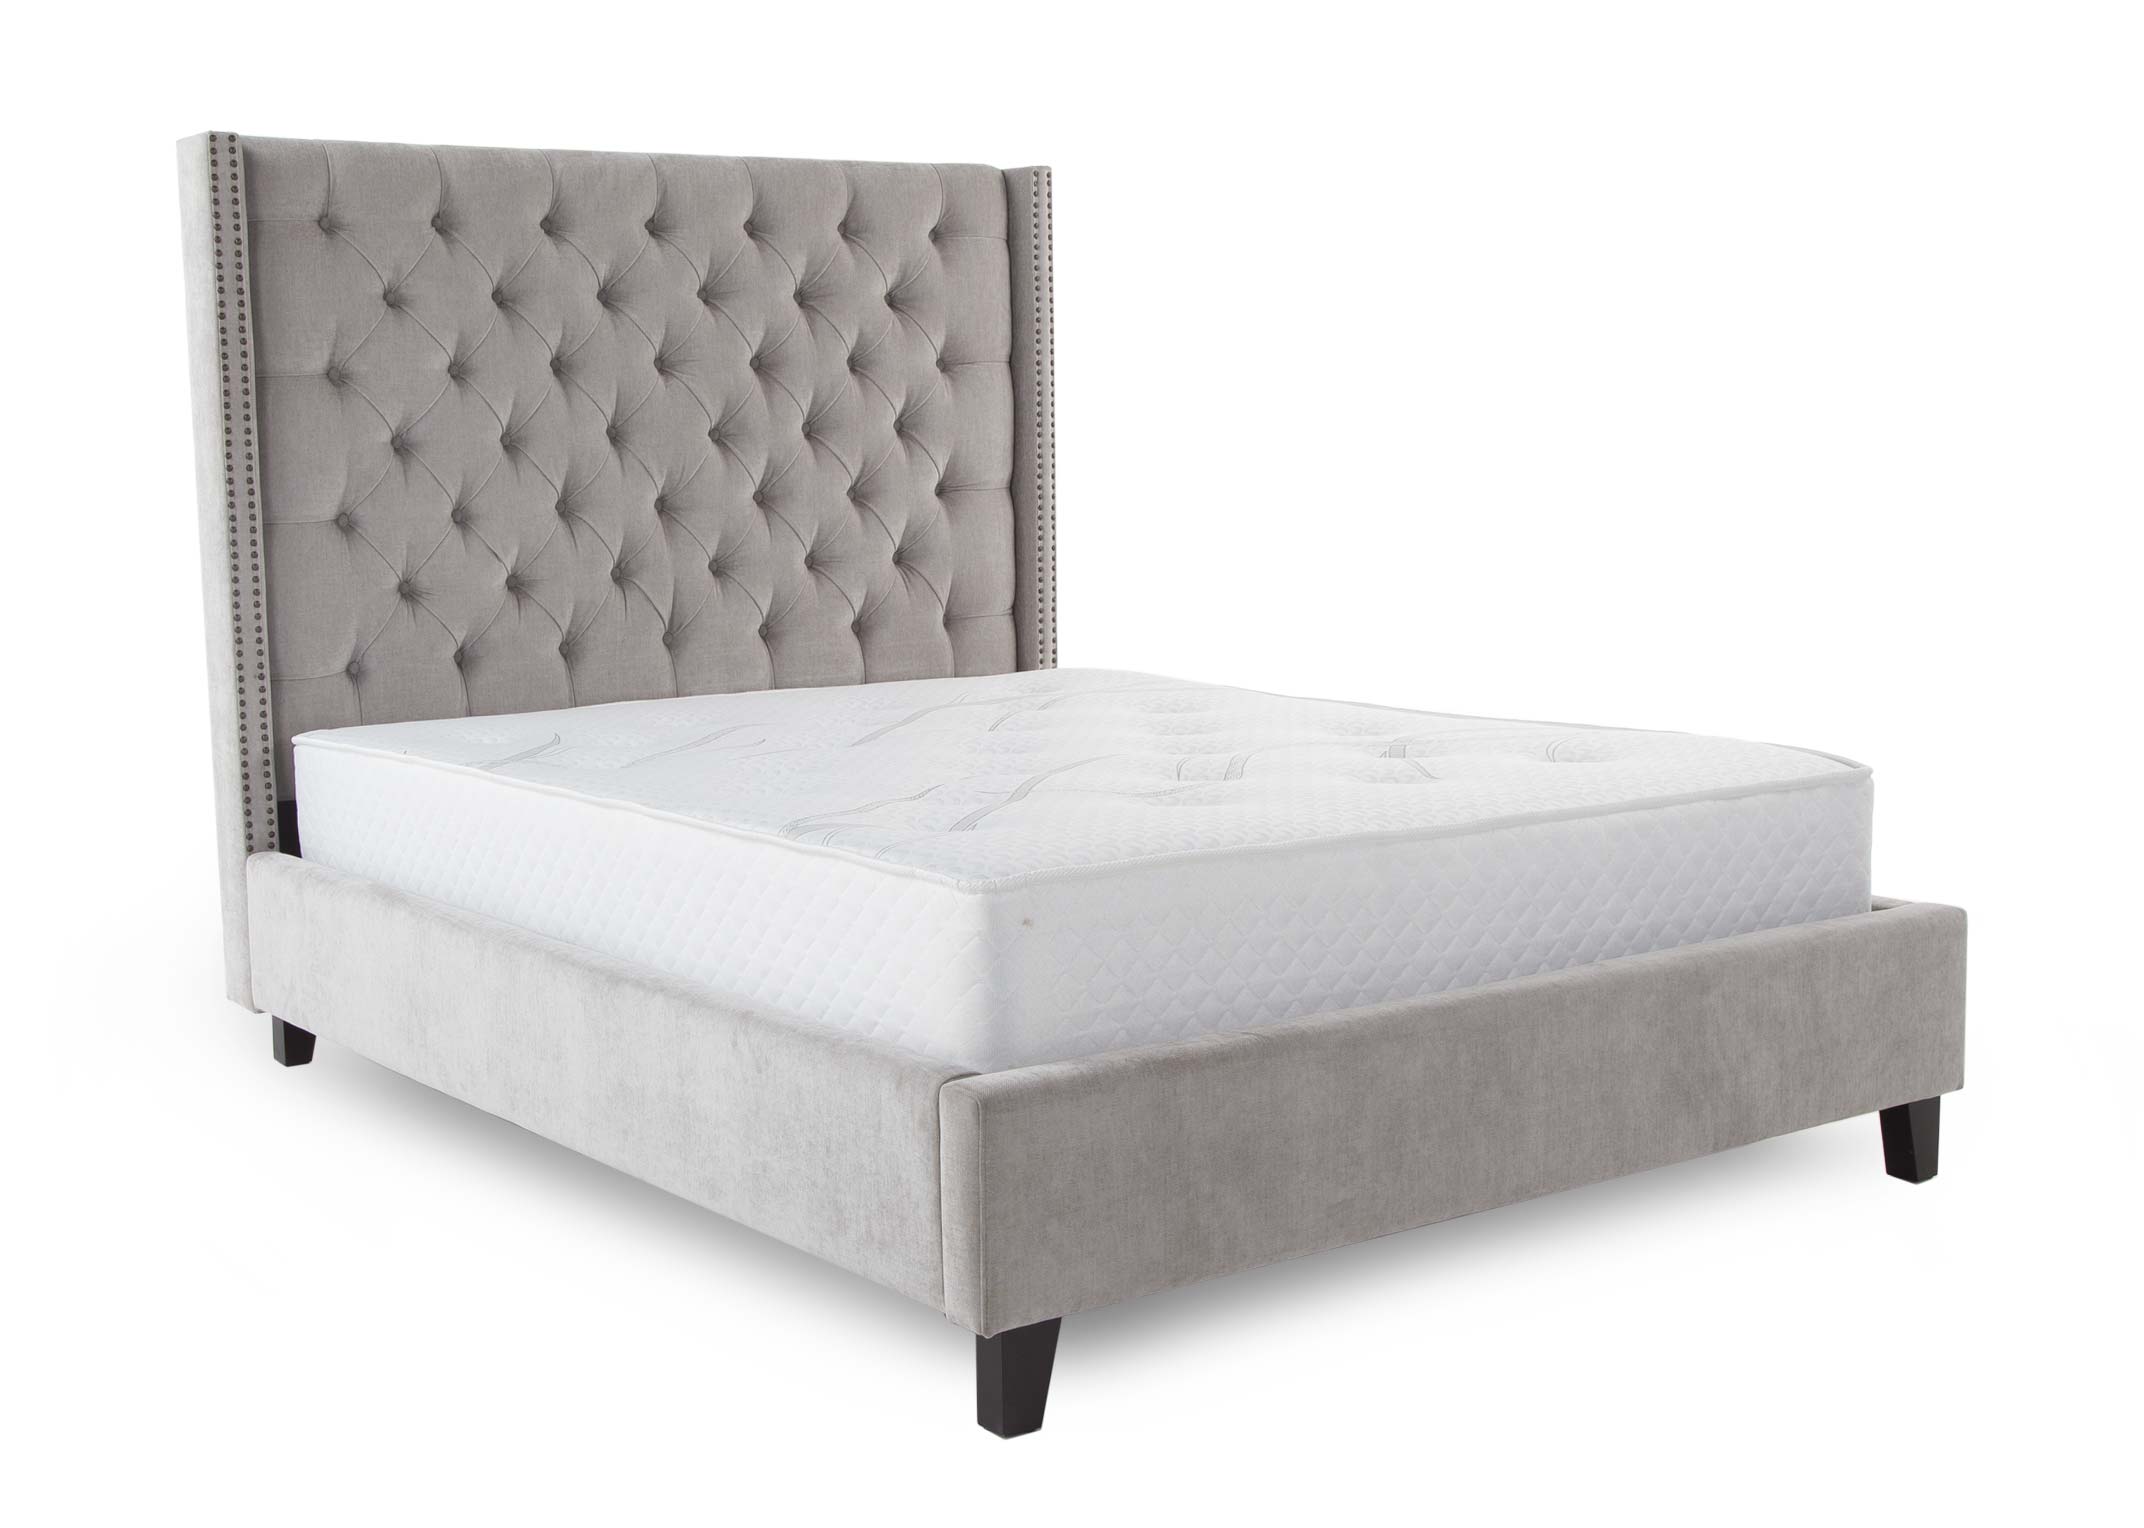 King Size 5ft Grey Fabric Bed Frame, How Many Inches Is A King Size Bed Frame